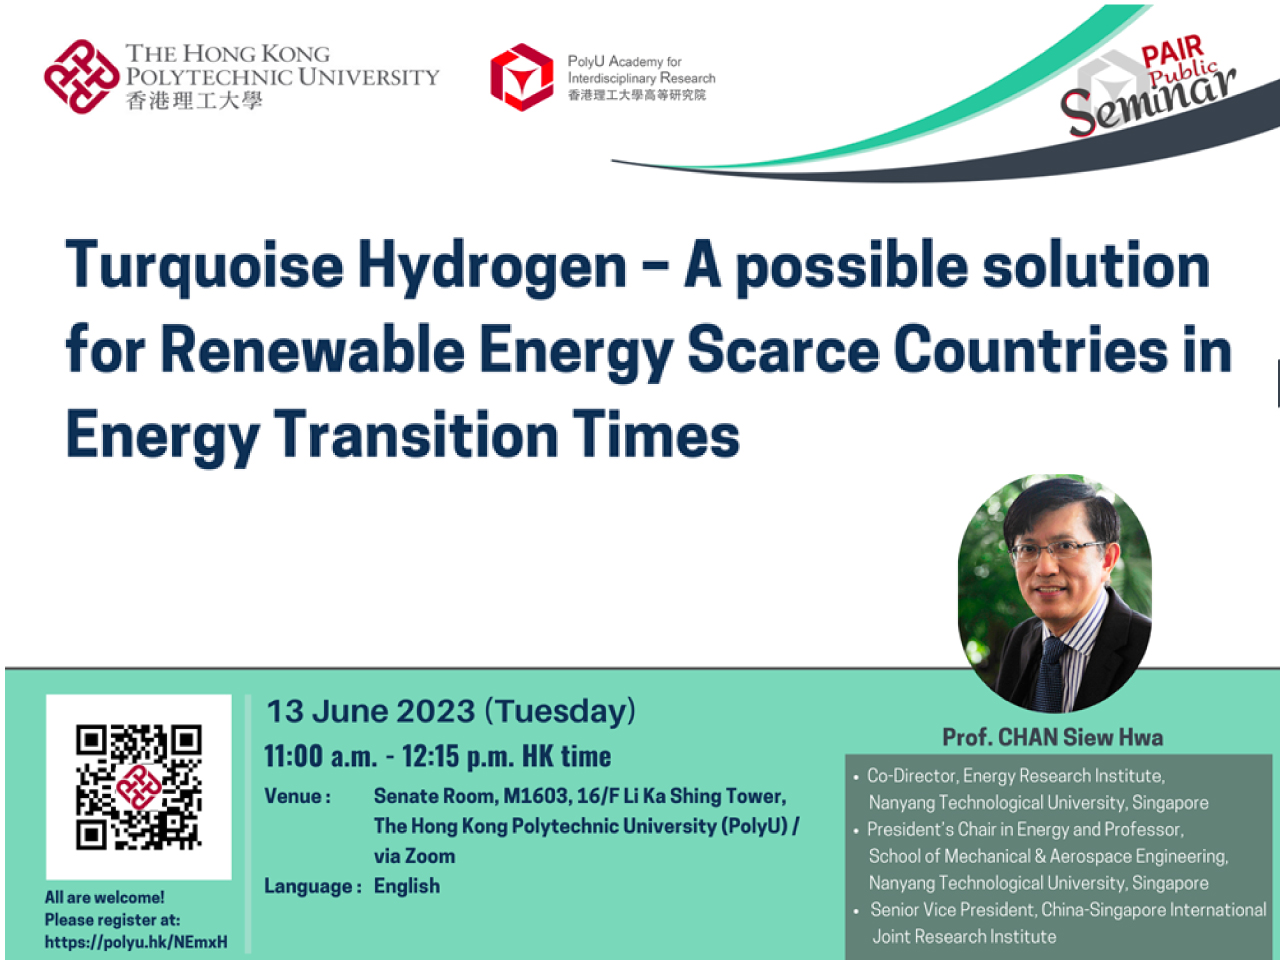 PAIR public seminar : turquoise hydrogen – a possible solution for renewable energy scarce countries in energy transition times